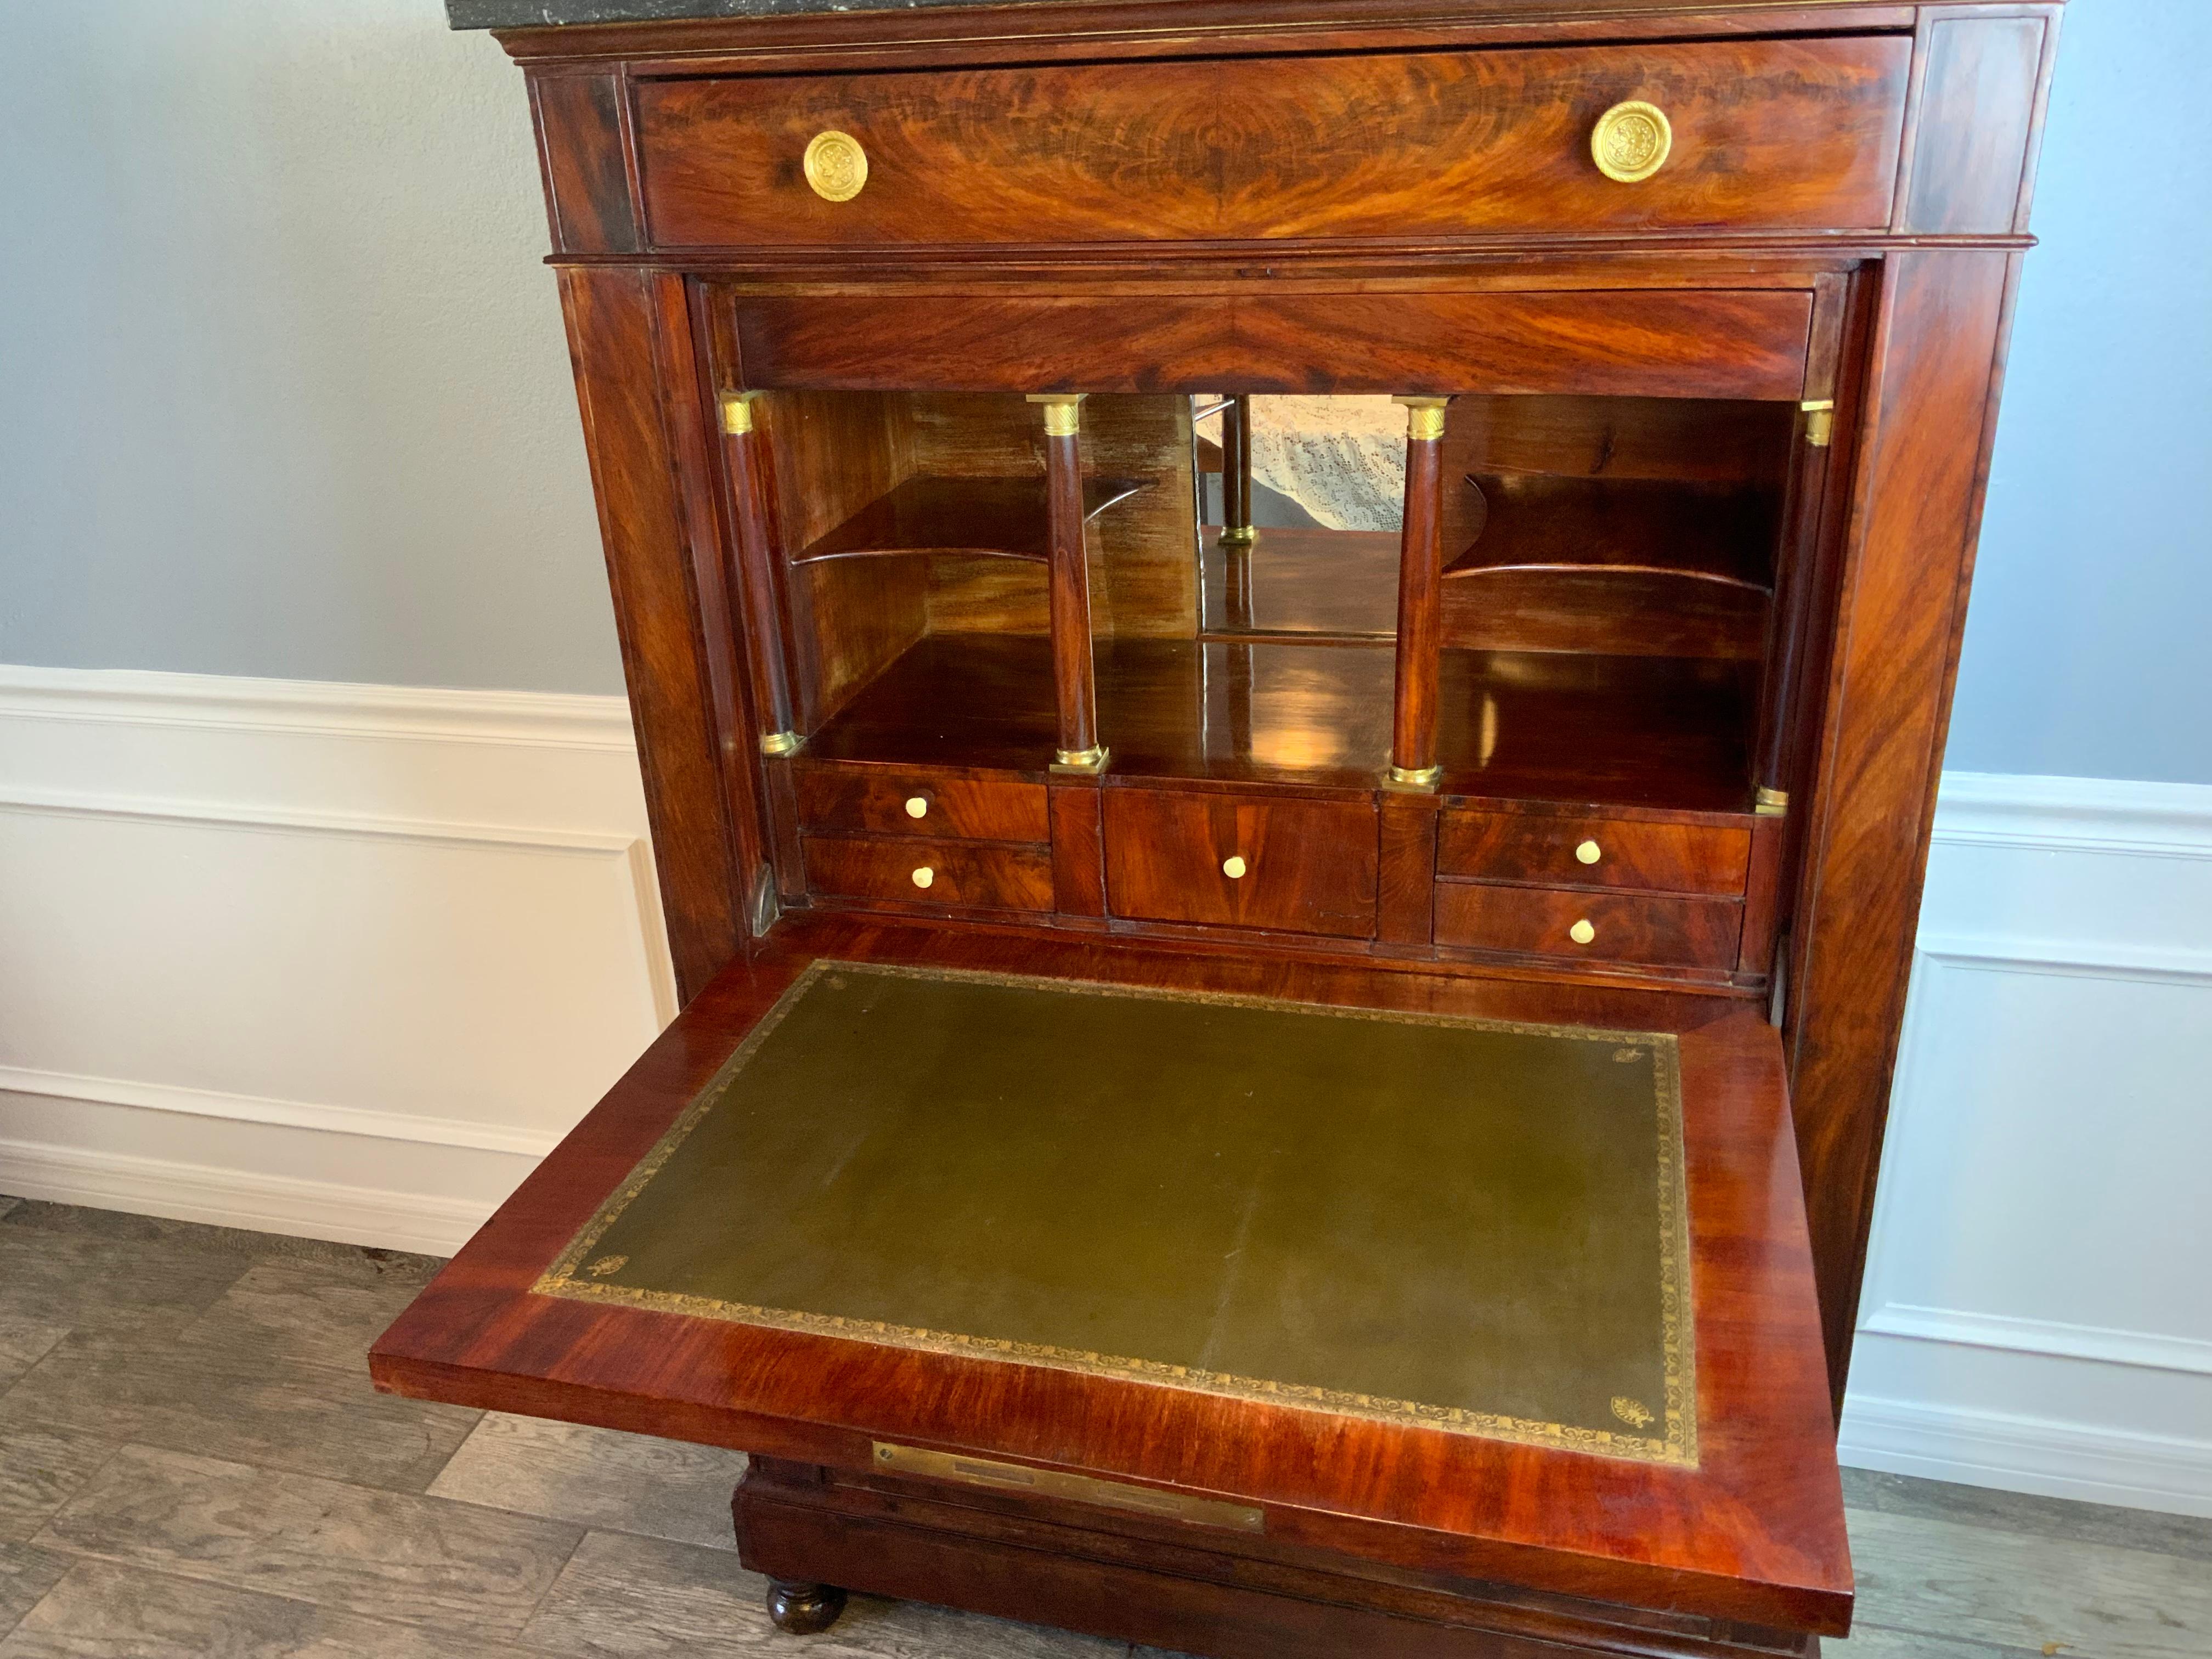 A very attractive French Drop Front Secretary in a highly figured crotch Mahogany veneer over a Pine case wood. Excellent form and color and a nicely aged patina on the old and possibly original surface. There is a secret well compartment housing